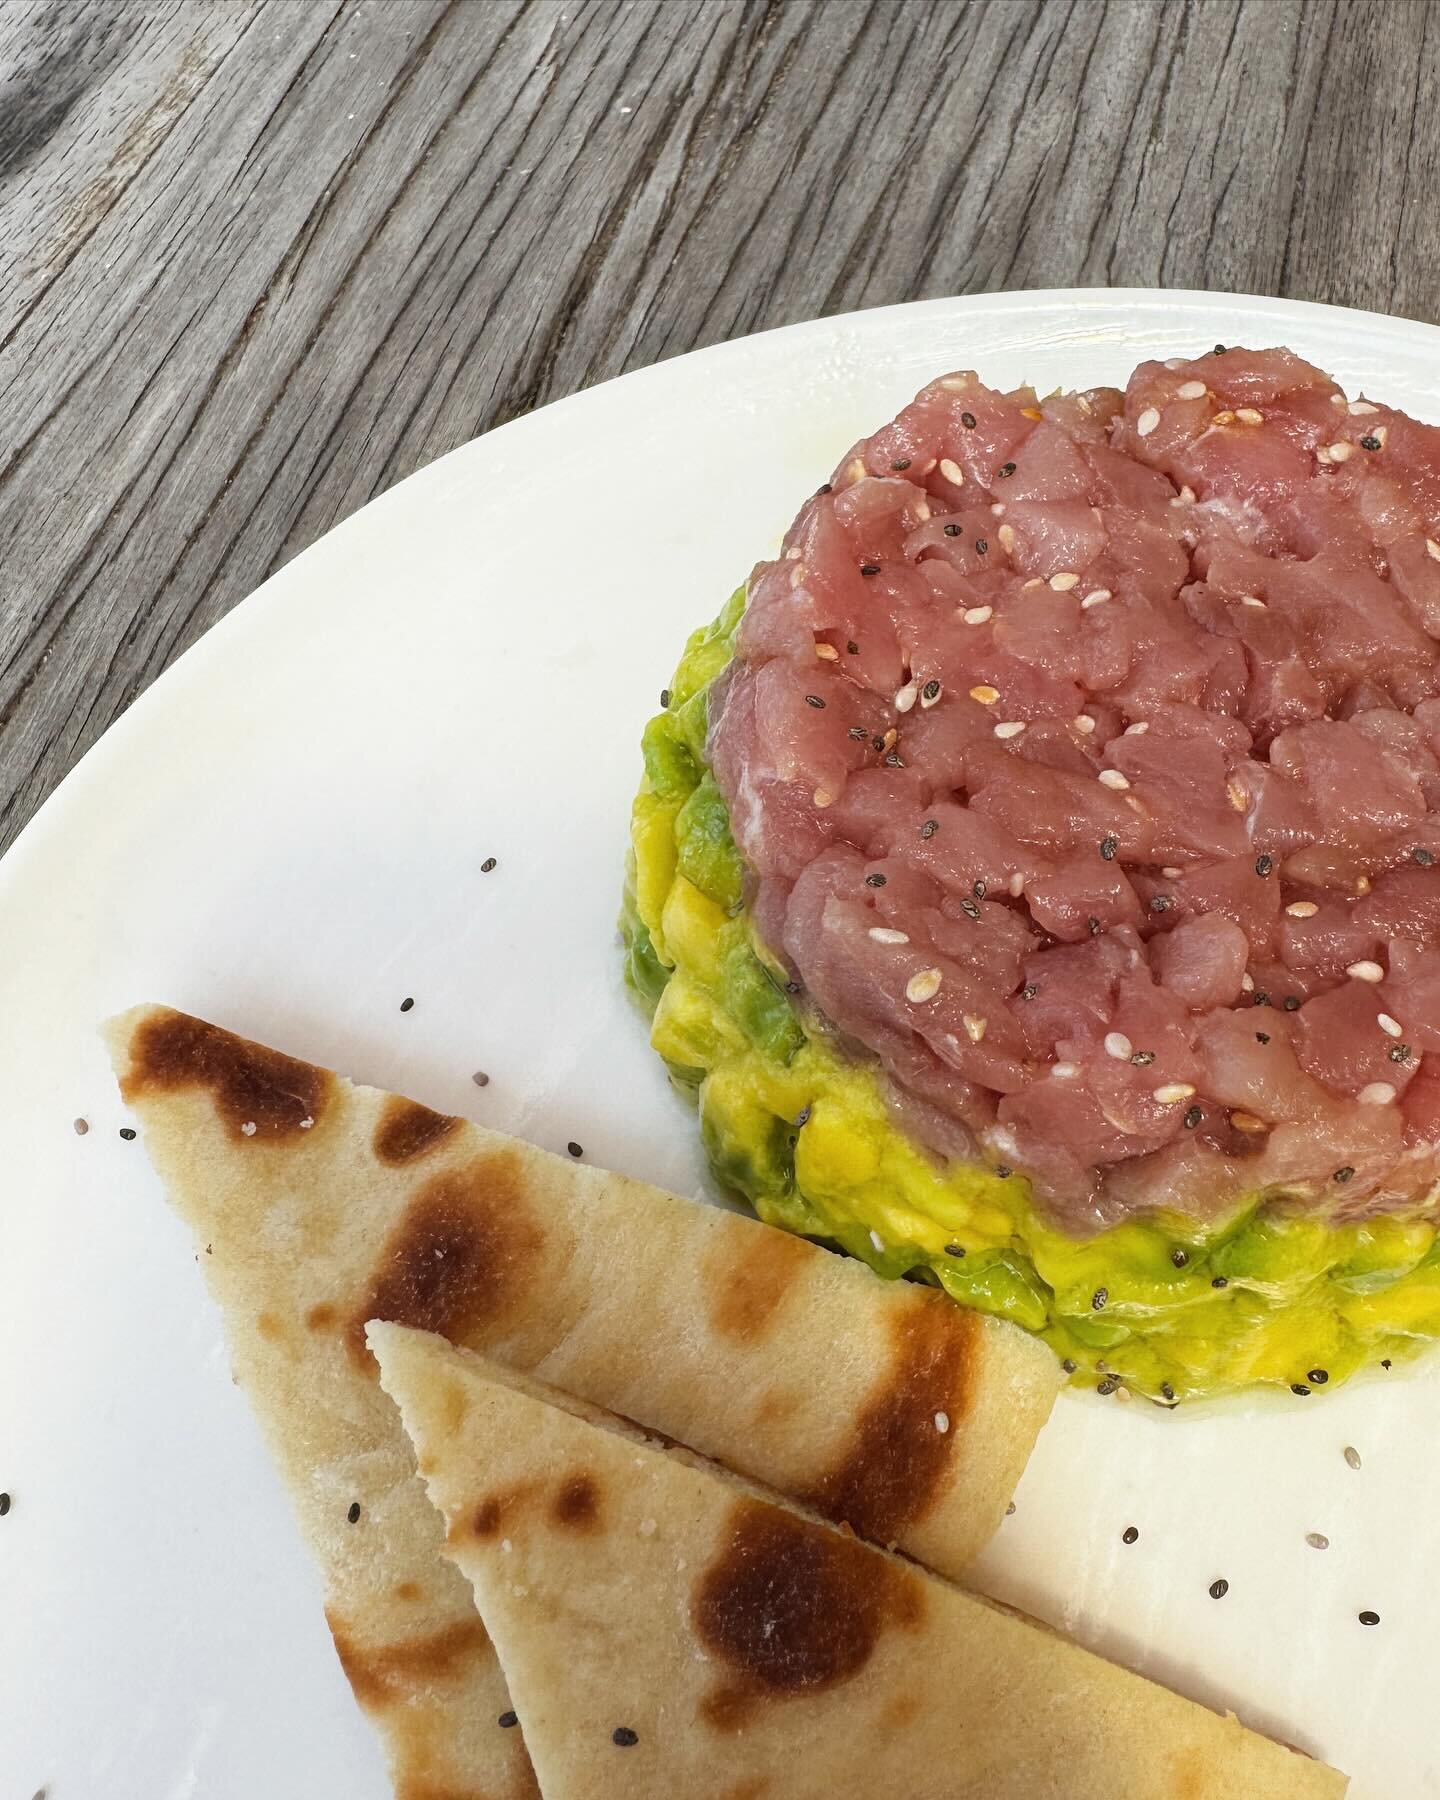 Small hunger? 

Dive into the seaside delights! 🌊

Our Tuna Tartar Avocado 🥑 is a symphony of fresh, raw tuna, creamy avocado, and a hint of zesty mango pickle. 
A burst of flavors that perfectly complements the beach vibes.

 #BeachBites #TunaTart